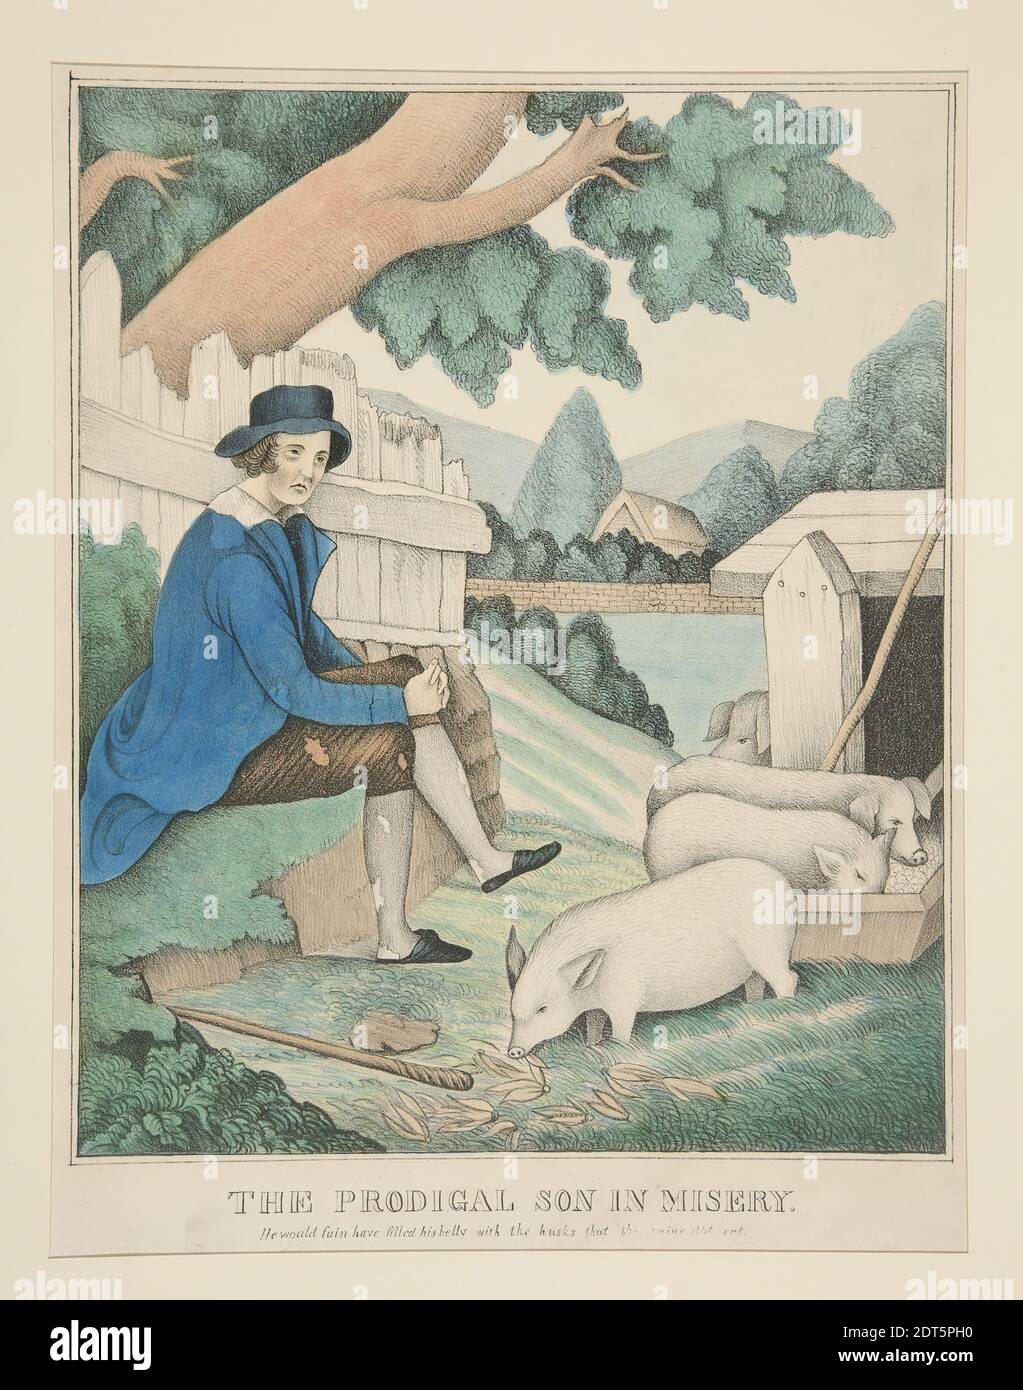 Lithographer: Unknown, The Prodigal Son in Misery, Lithograph, hand colored, sheet: 35.5 × 25 cm (14 × 9 13/16 in.), Made in United States, American, 19th century, Works on Paper - Prints Stock Photo